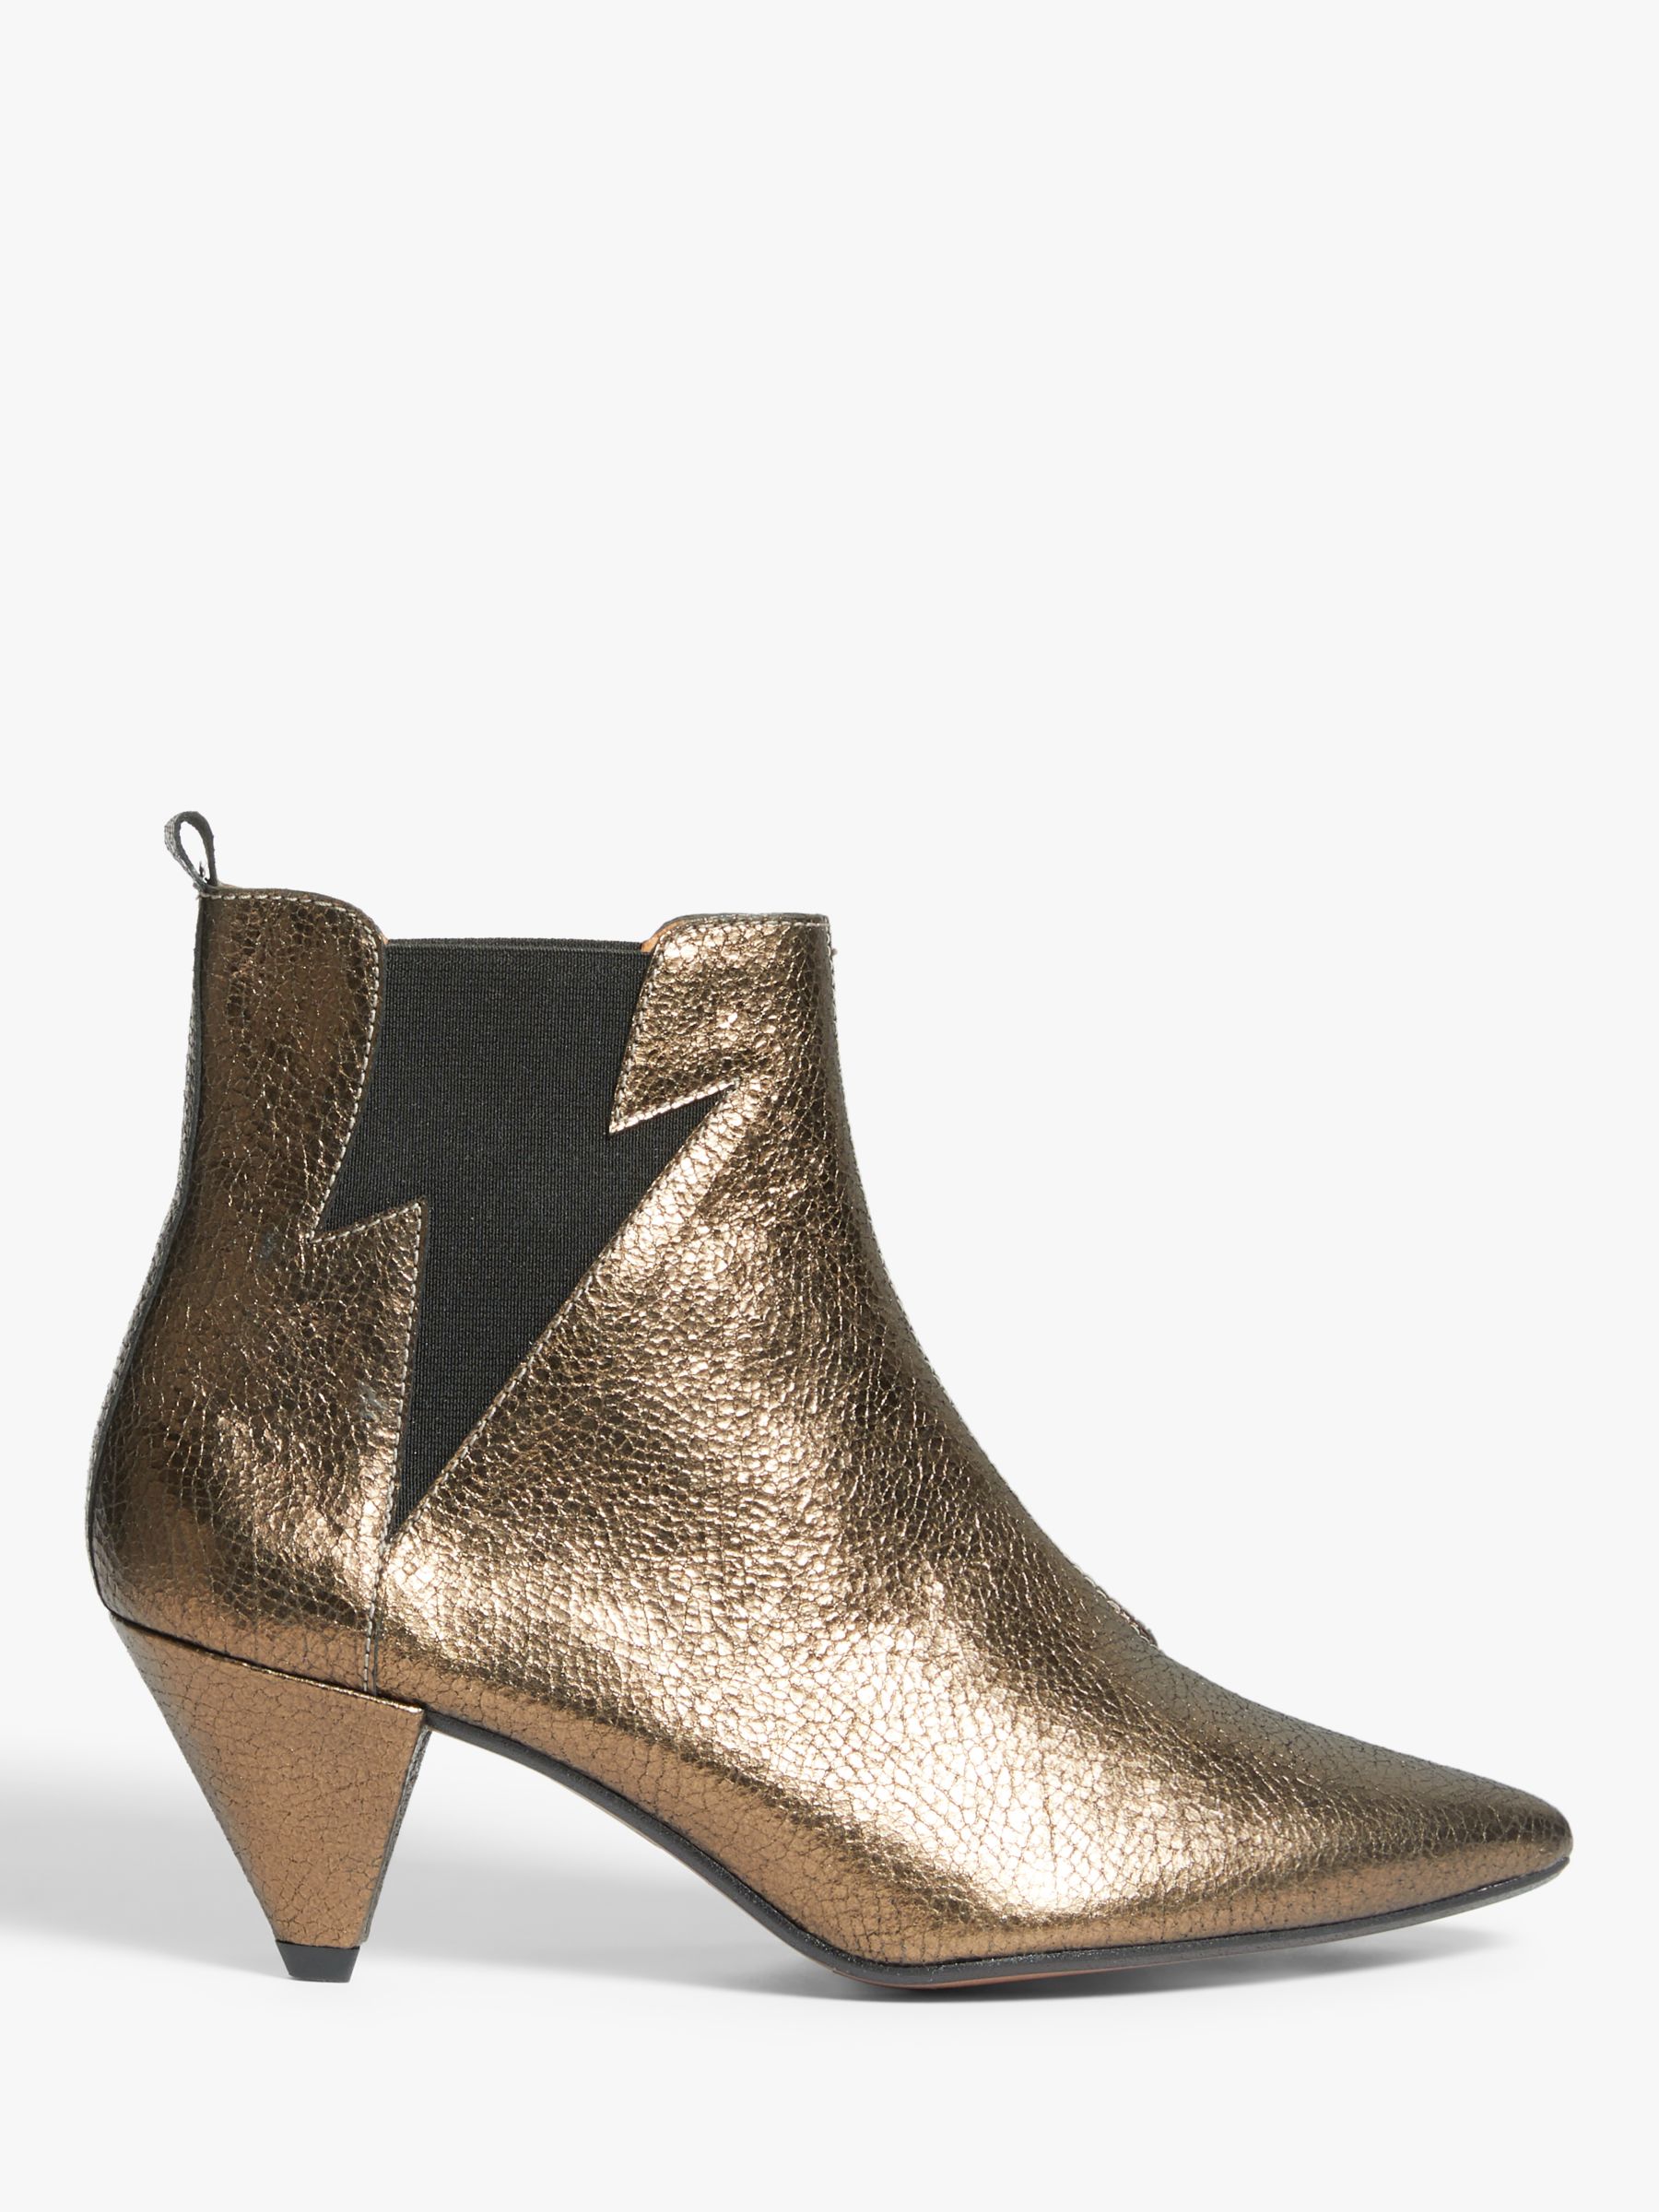 AND/OR Robbin Leather Lightning Bolt Ankle Boots, Gold